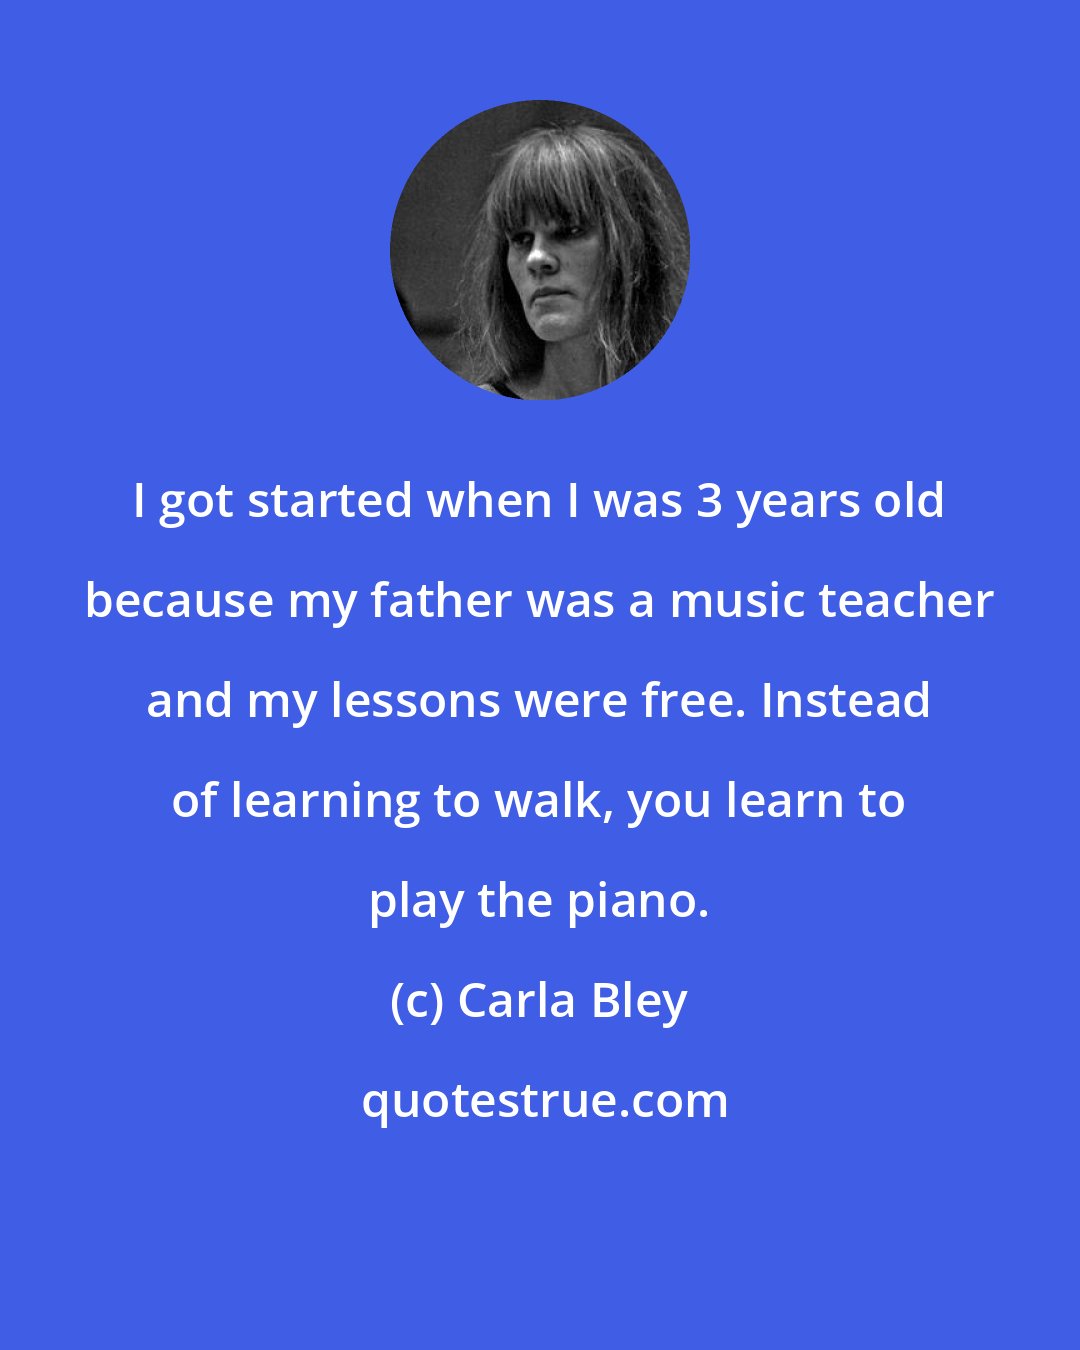 Carla Bley: I got started when I was 3 years old because my father was a music teacher and my lessons were free. Instead of learning to walk, you learn to play the piano.